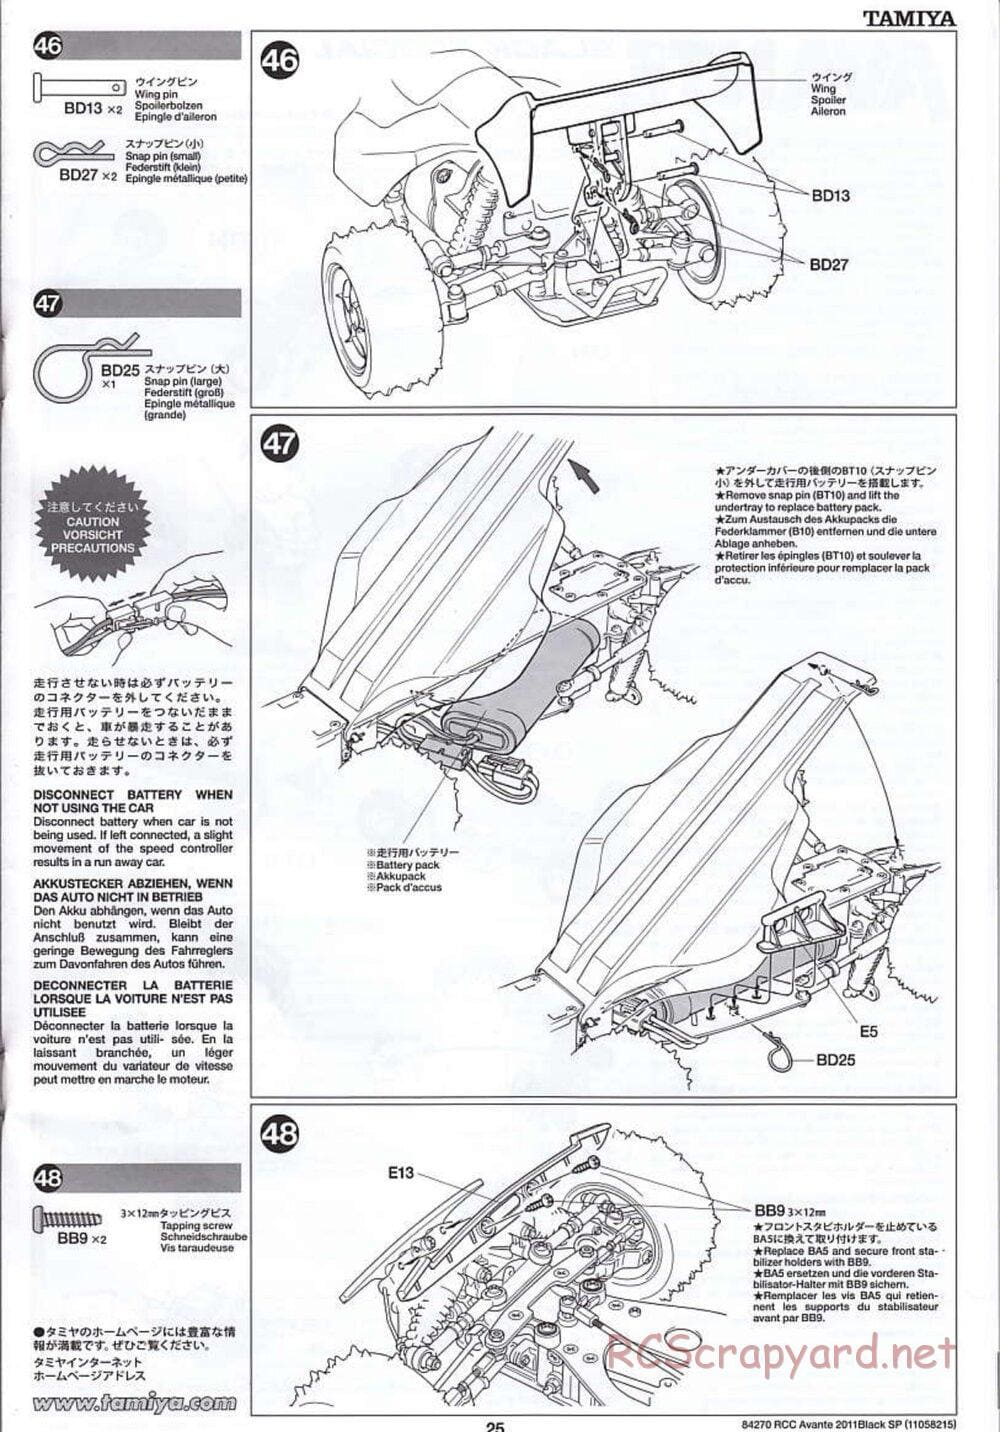 Tamiya - Avante 2011 - Black Special Chassis - Manual - Page 25